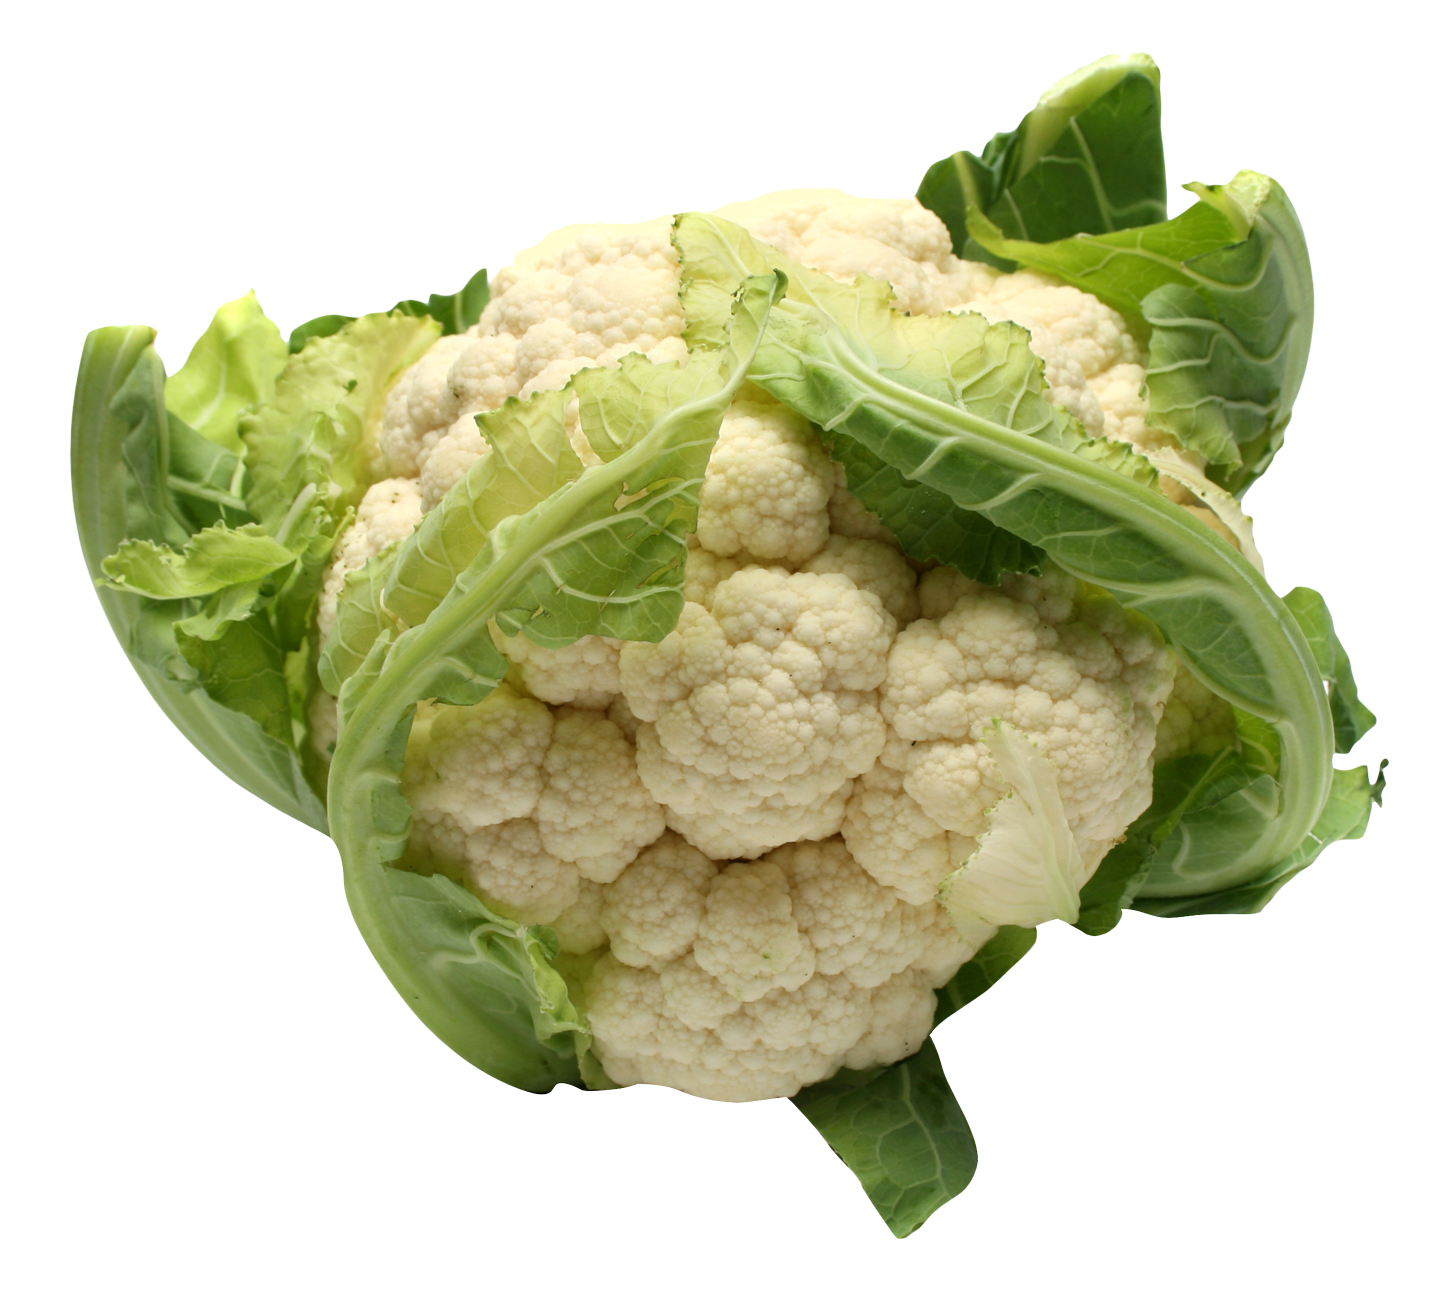 A Cauliflower With Leaves